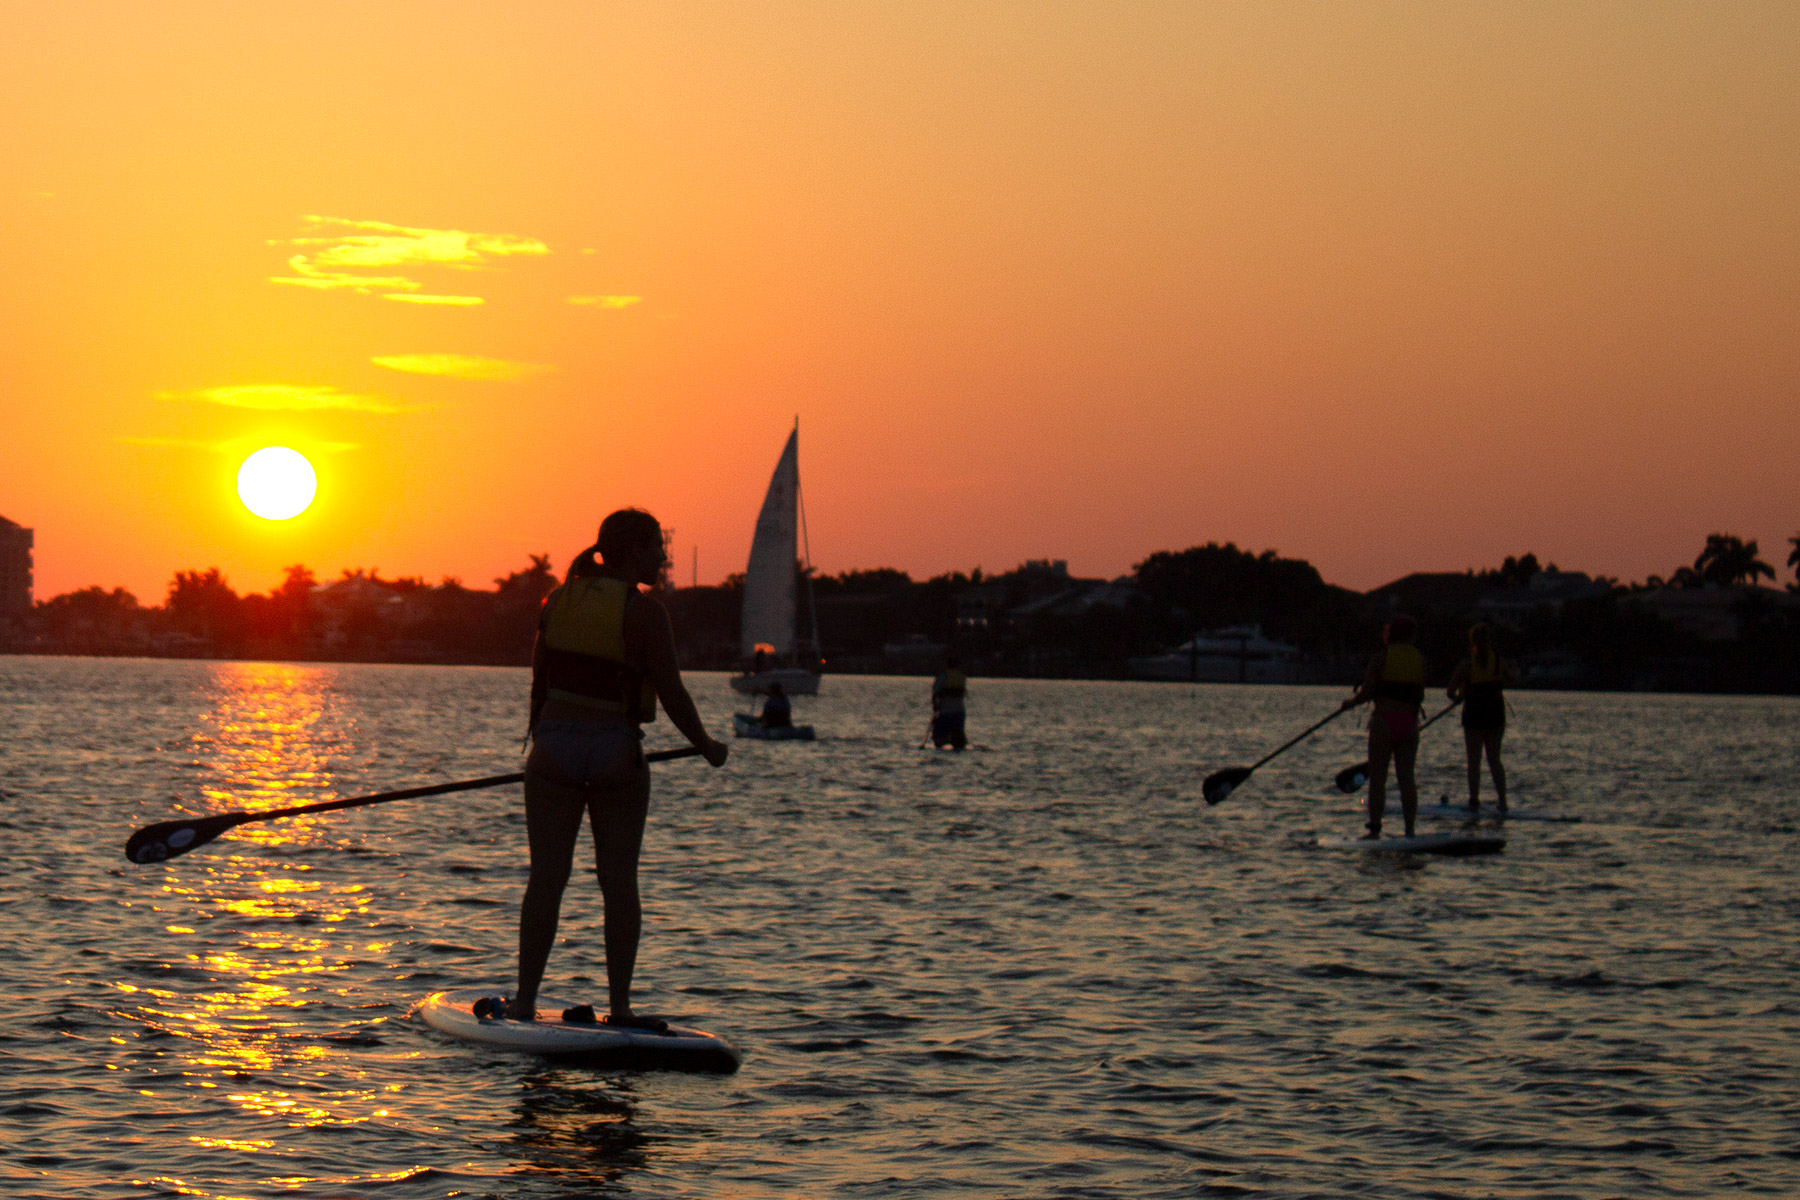 Paddleboarders and sailboat head out over the water towards an orange sunset